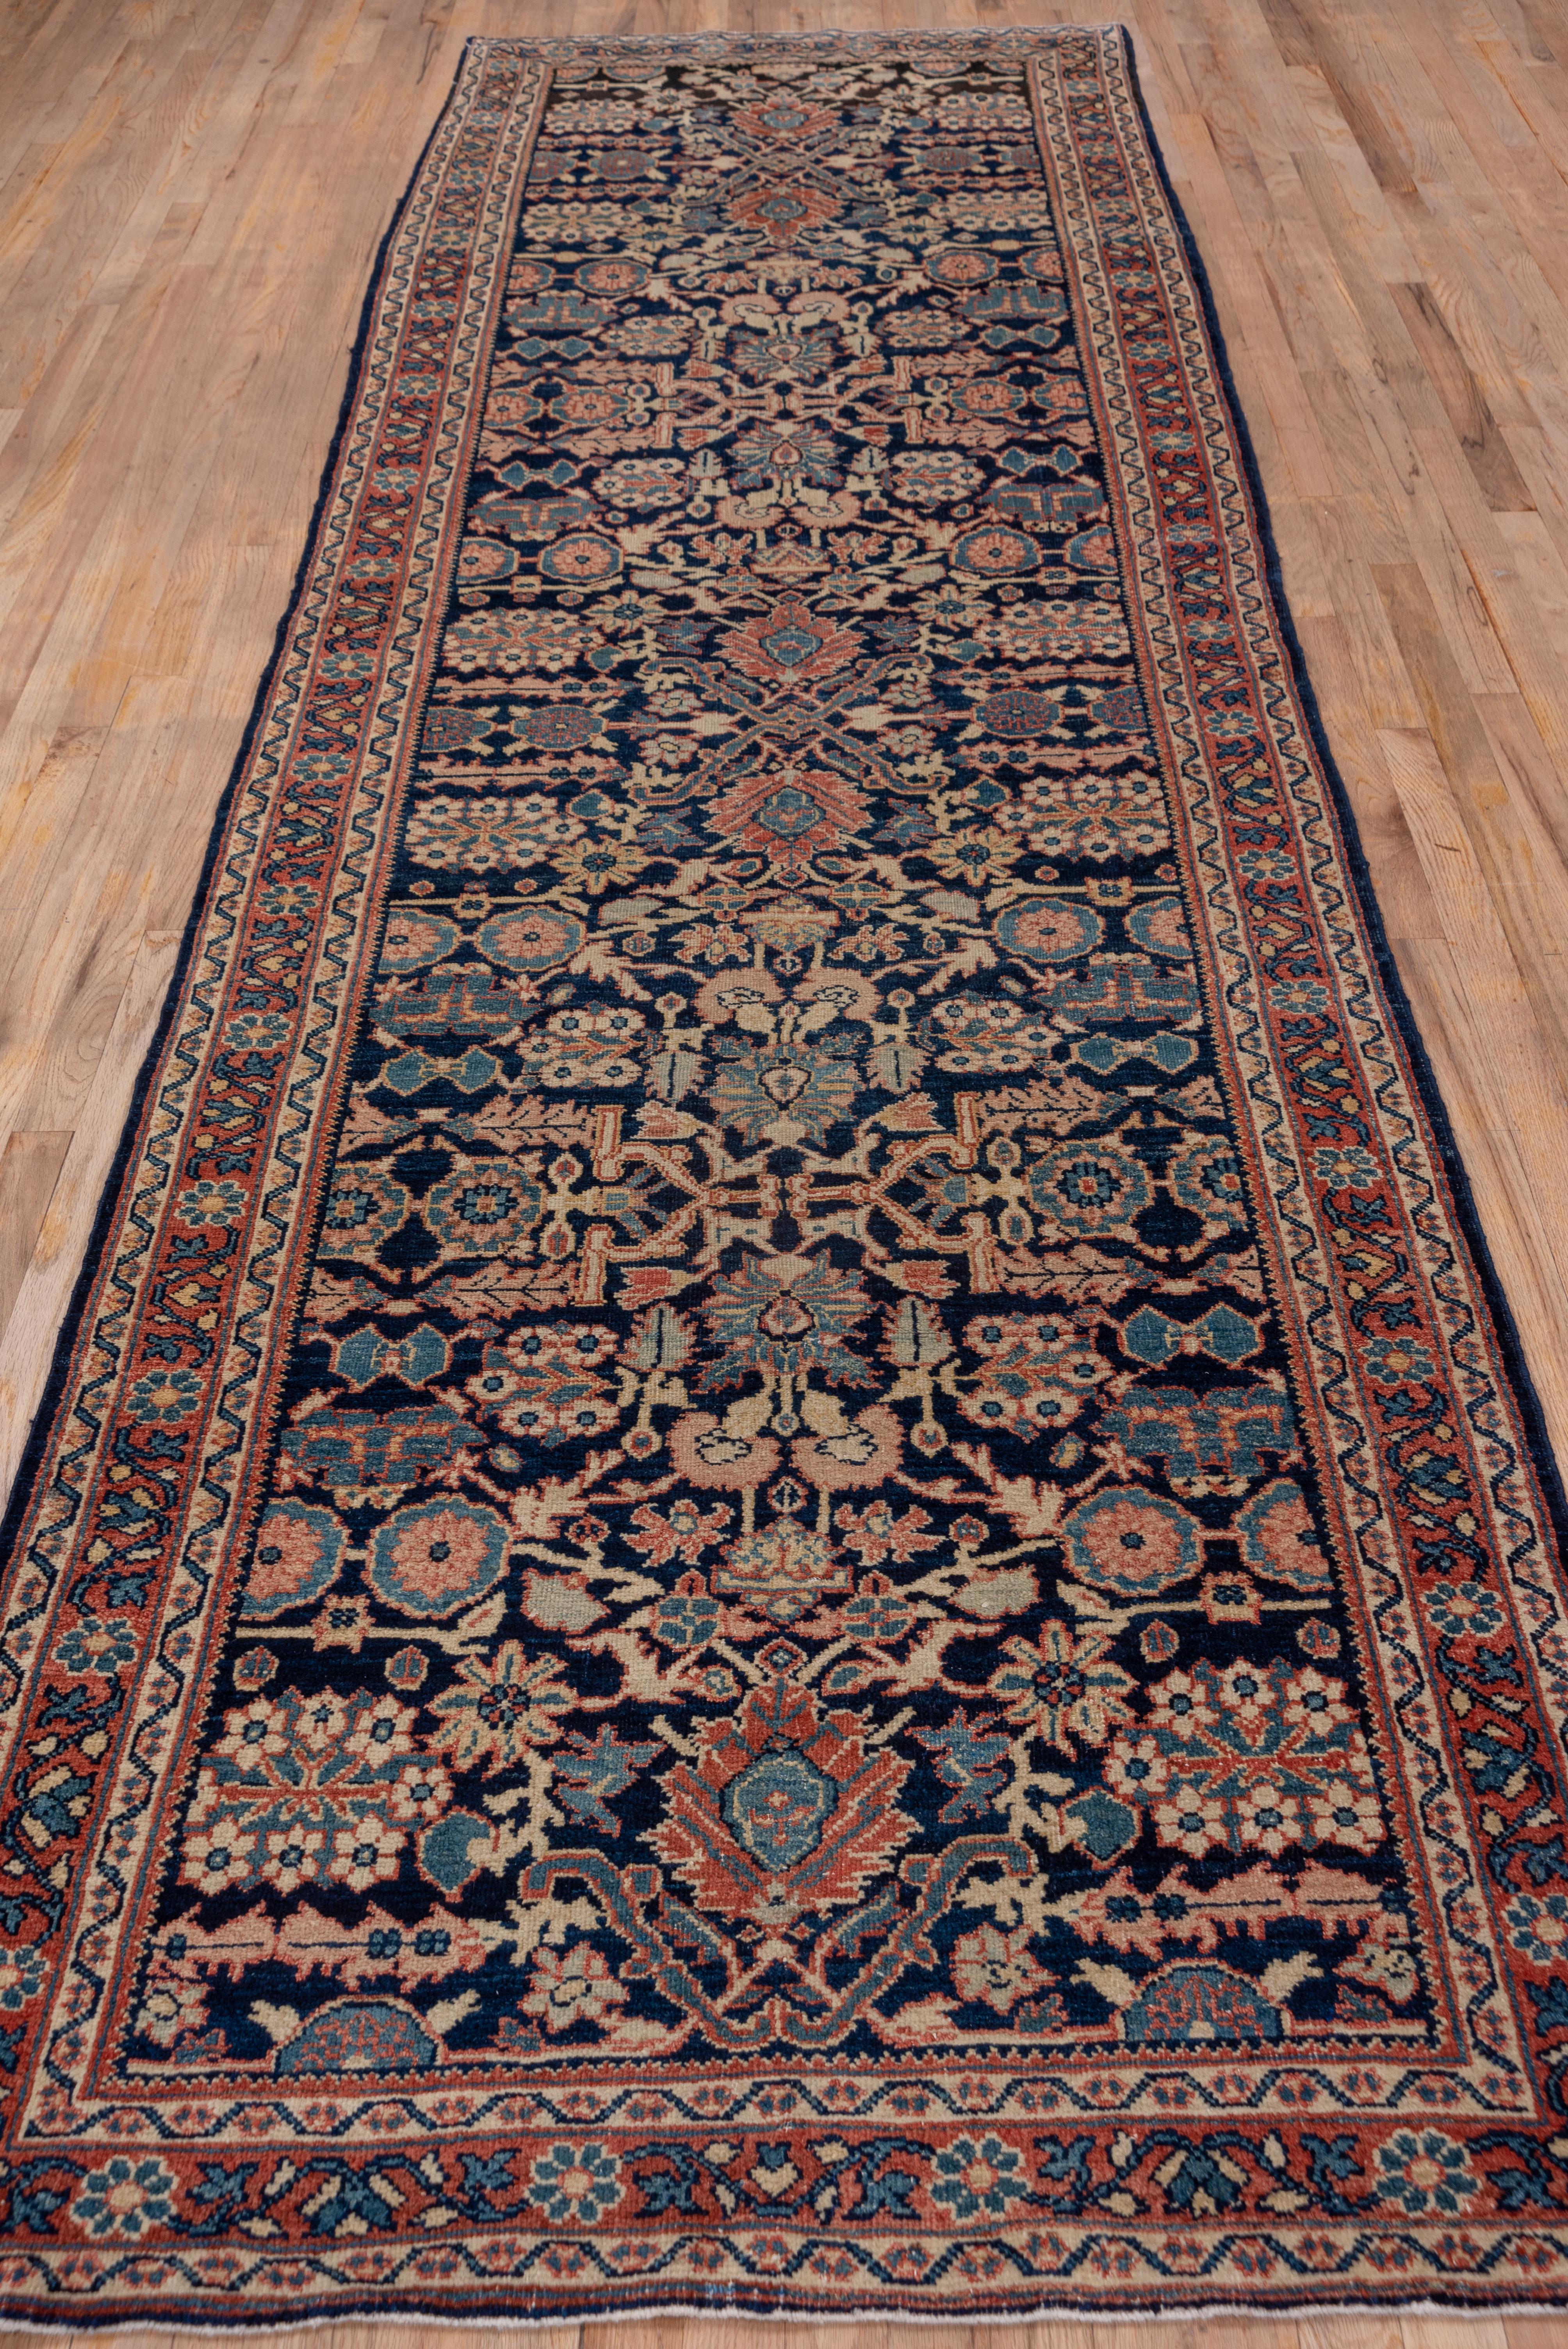 This west Persian village runner shows a deep blue field with secondary touches in lighter blues, decorating a centrally organised palmette pattern with round and petal rosettes and thick arabesques in blue and cream. The narrow madder border shows